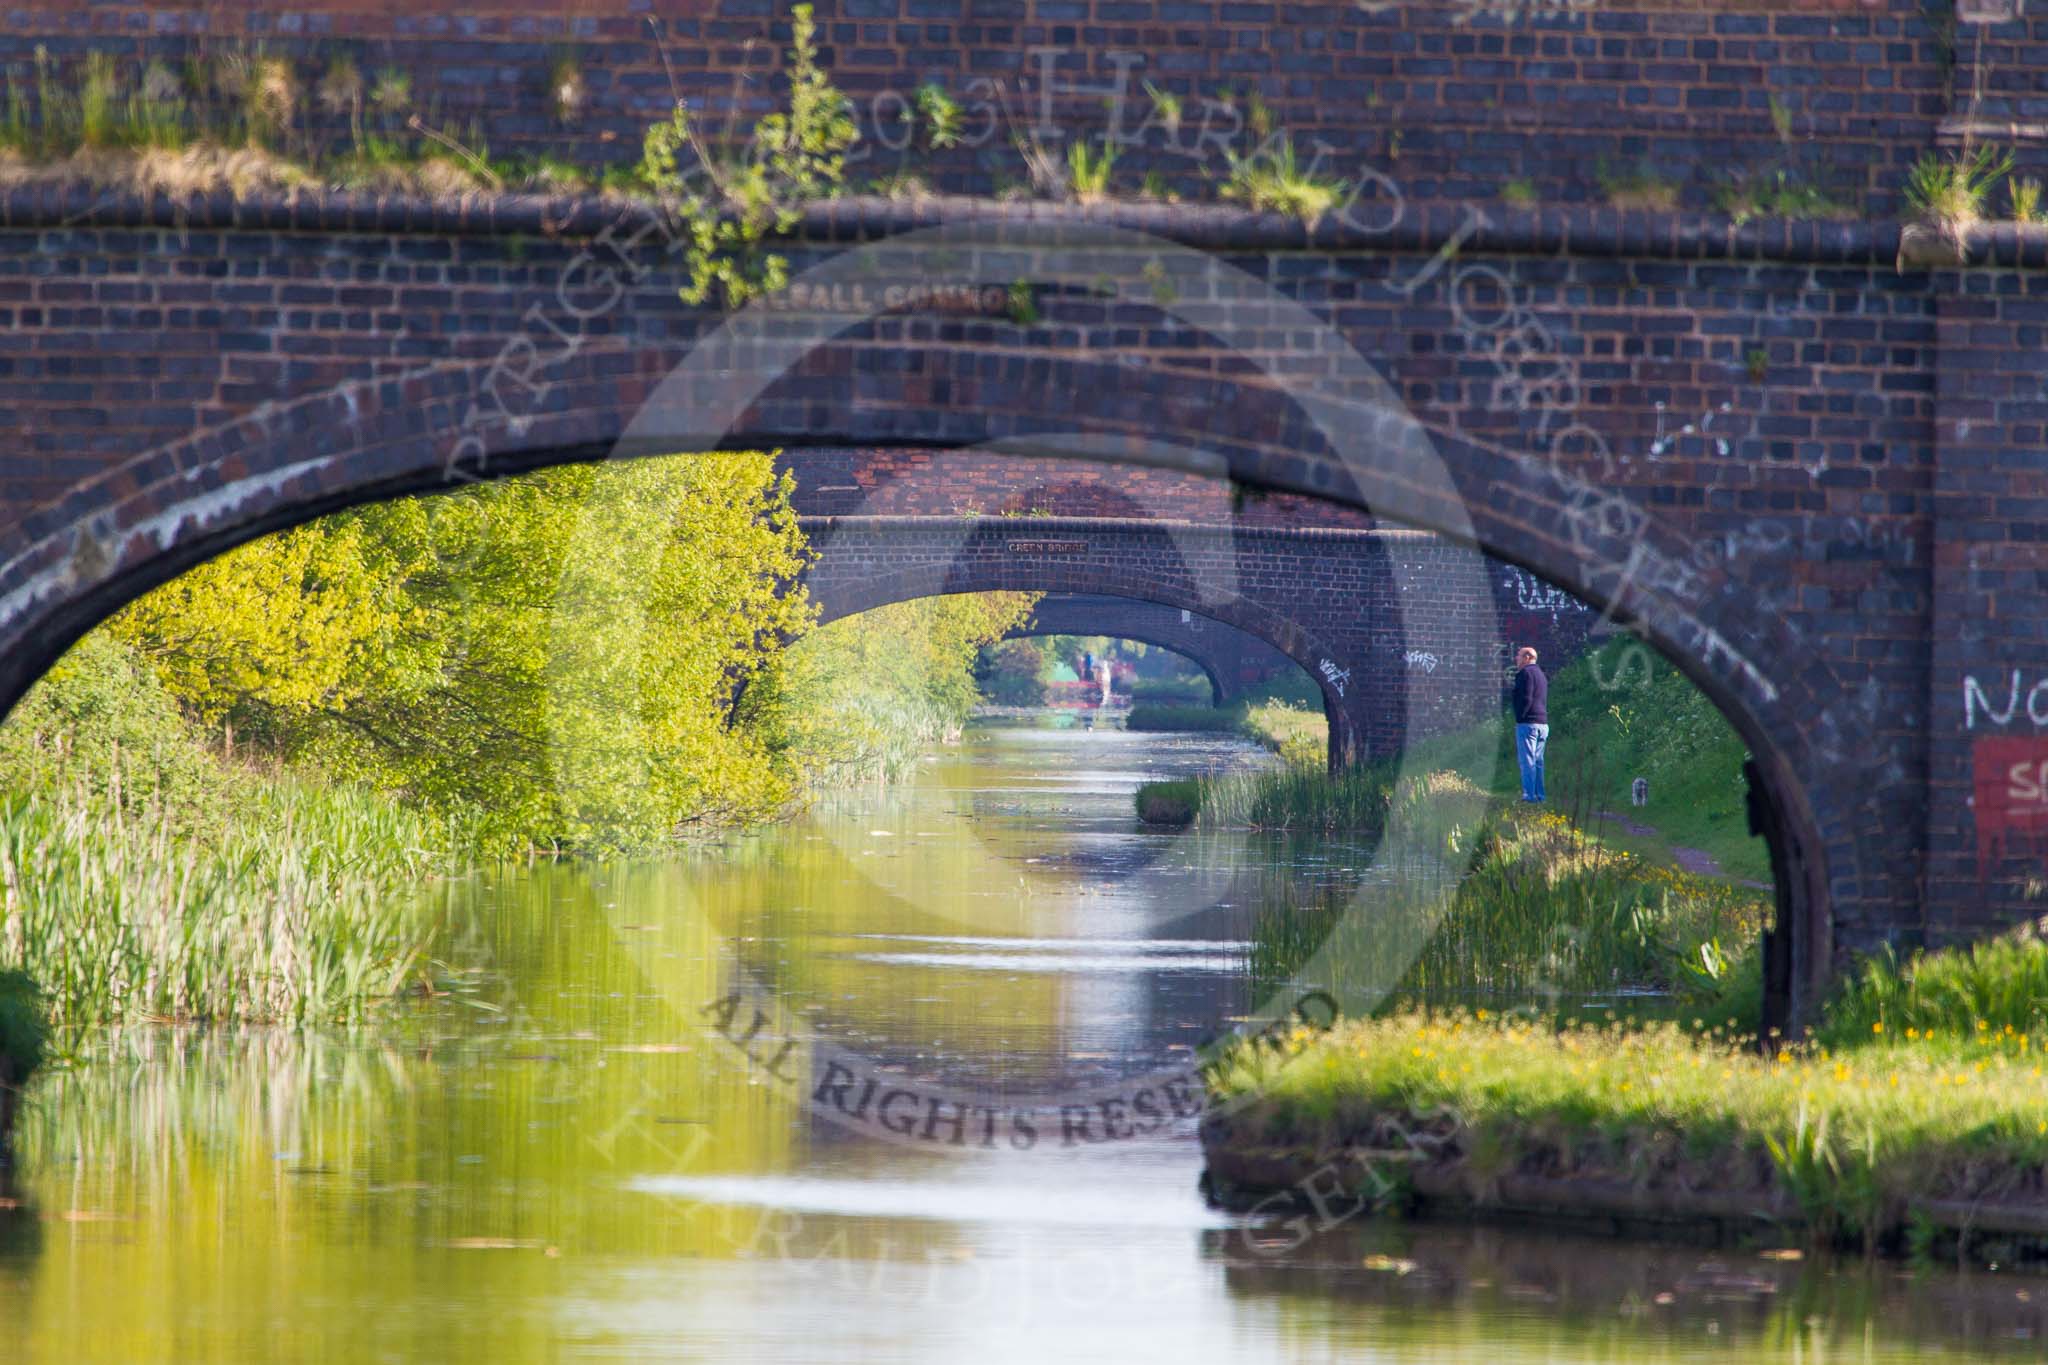 BCN Marathon Challenge 2013: Three bridges in a row on the Cannock Extension Canal - Walsall Common, Pelsall Common, and Green Bridge..
Birmingham Canal Navigation,


United Kingdom,
on 26 May 2013 at 08:15, image #364